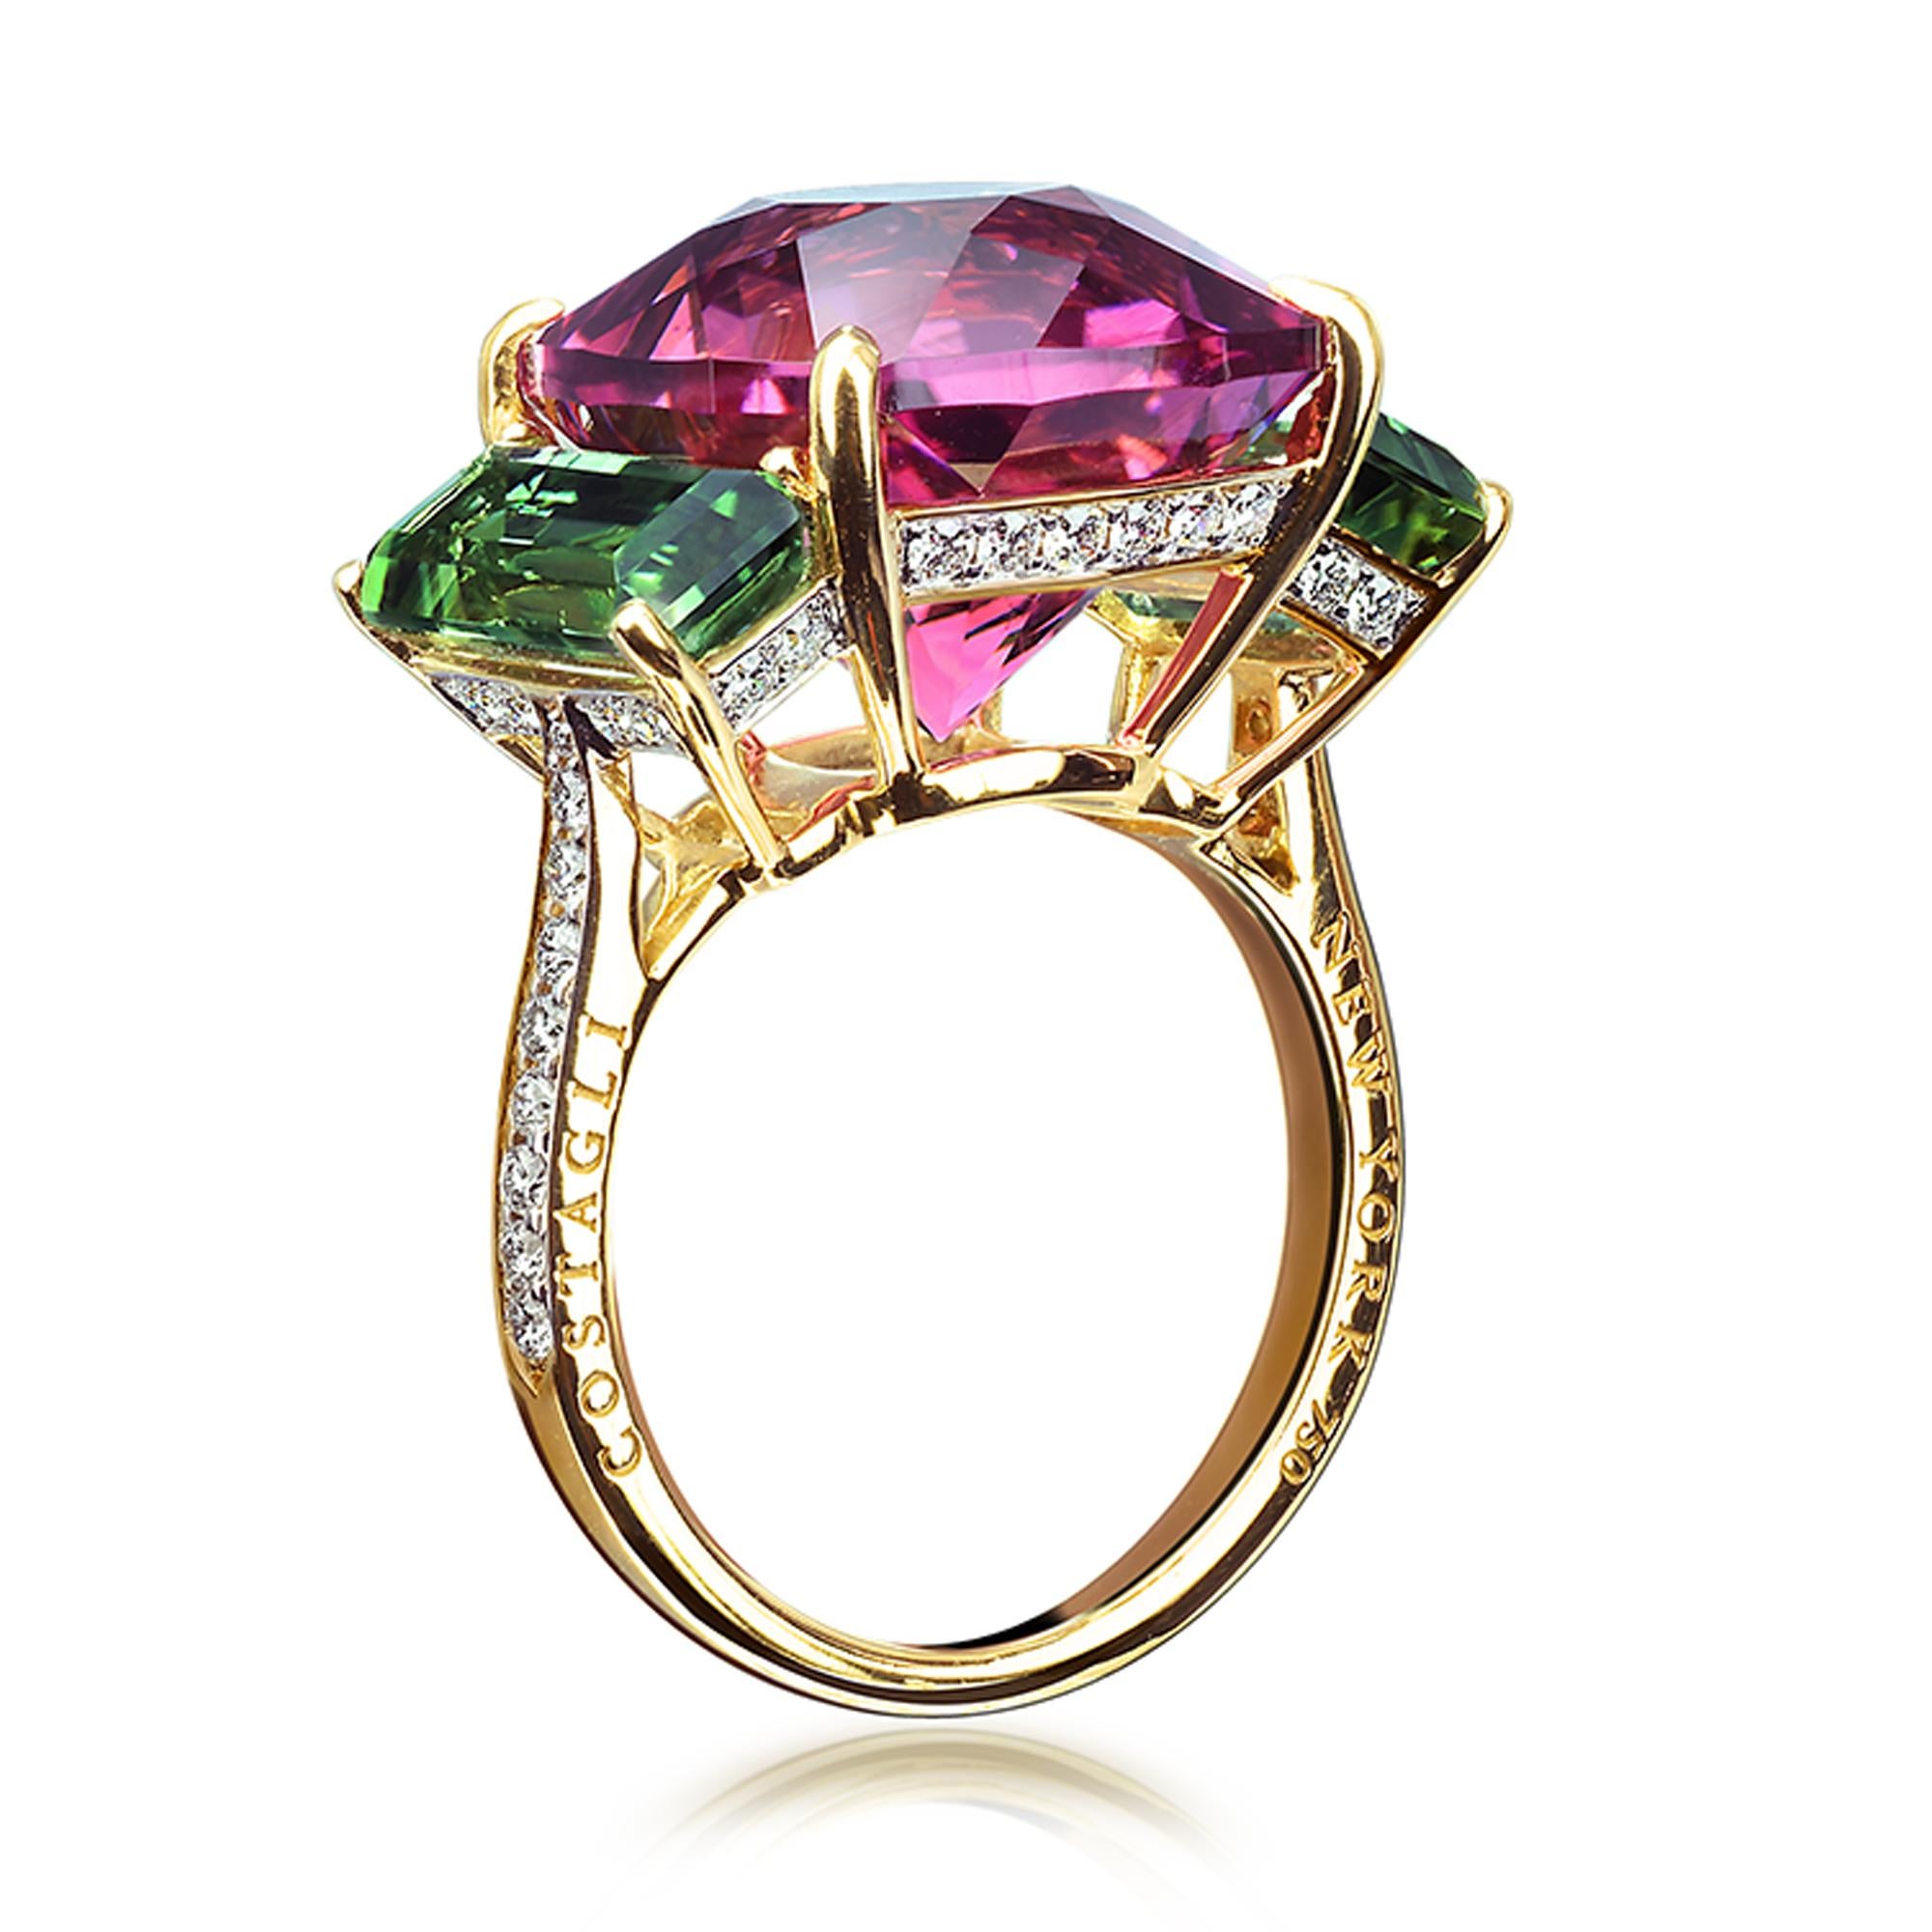 Contemporary Paolo Costagli Change of Color Tourmaline and Green Tourmaline Ring